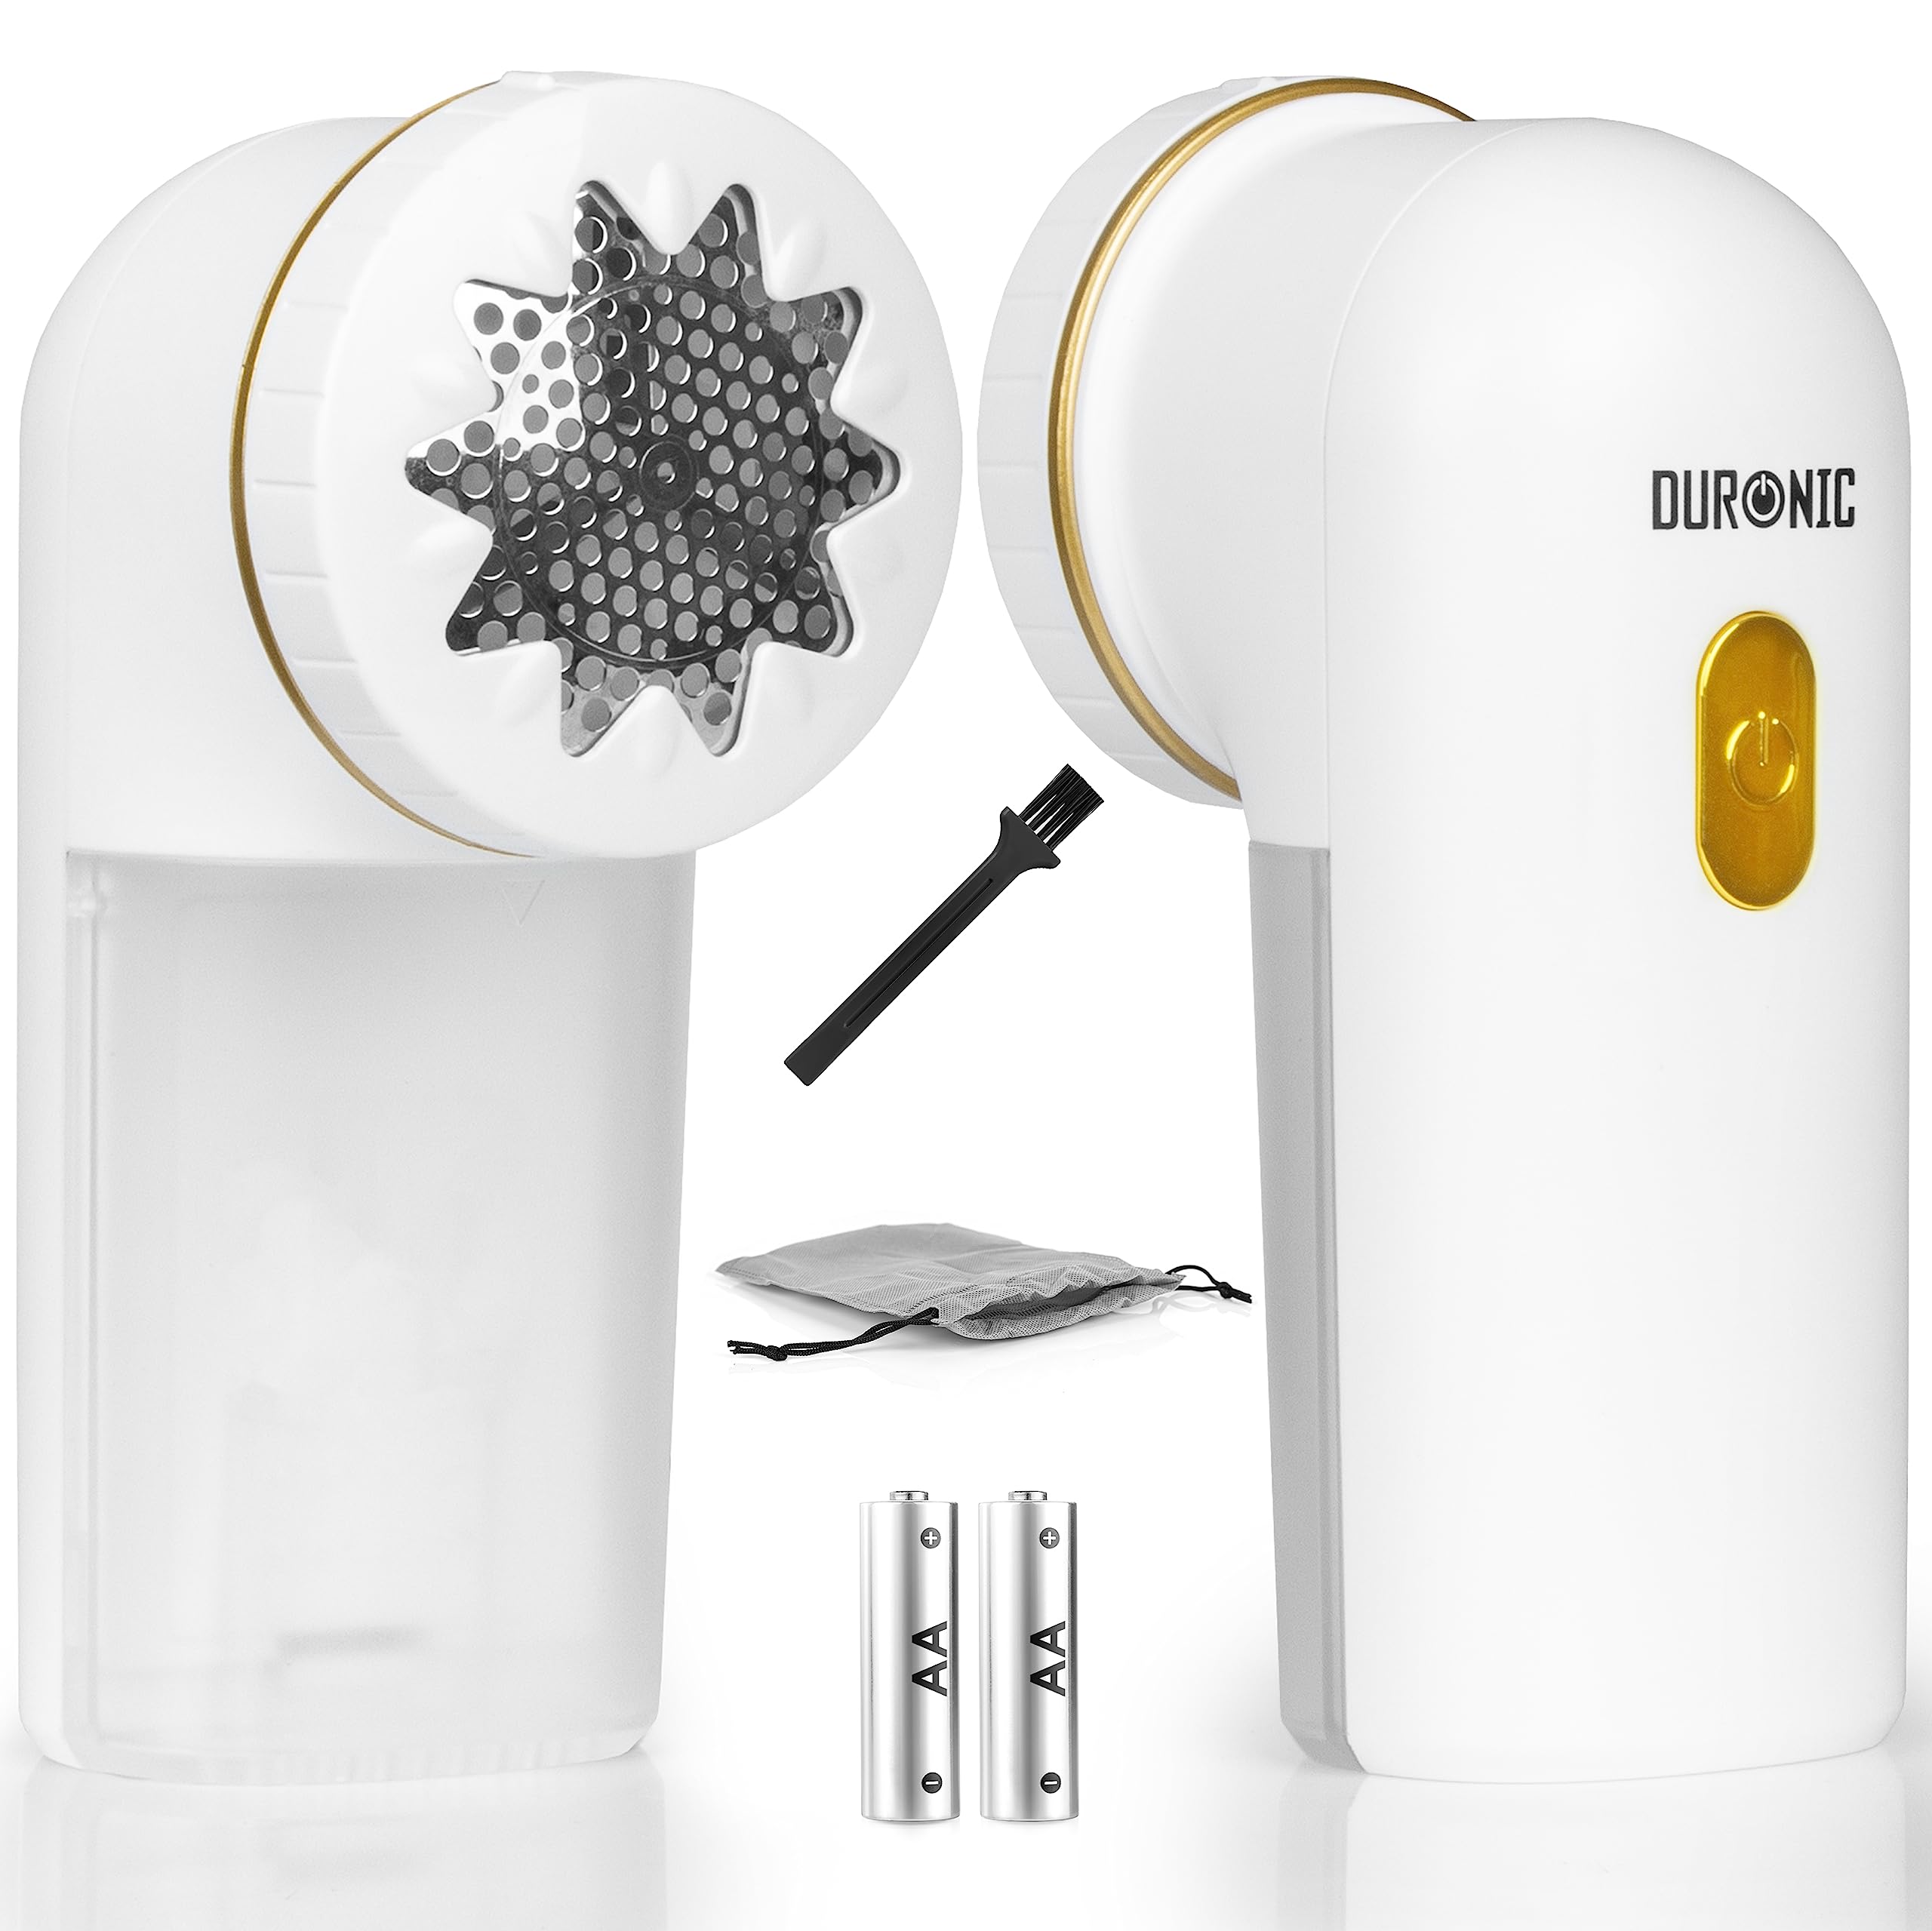 Duronic Fabric Shaver FS22 WE, De-Bobbler Removes Lint and Bobbles from Clothes, 2 Speed Fuzz and Fabric Pill Remover, with Storage Pouch, Revive Old Jumpers, Sweaters, Coats – White / Gold